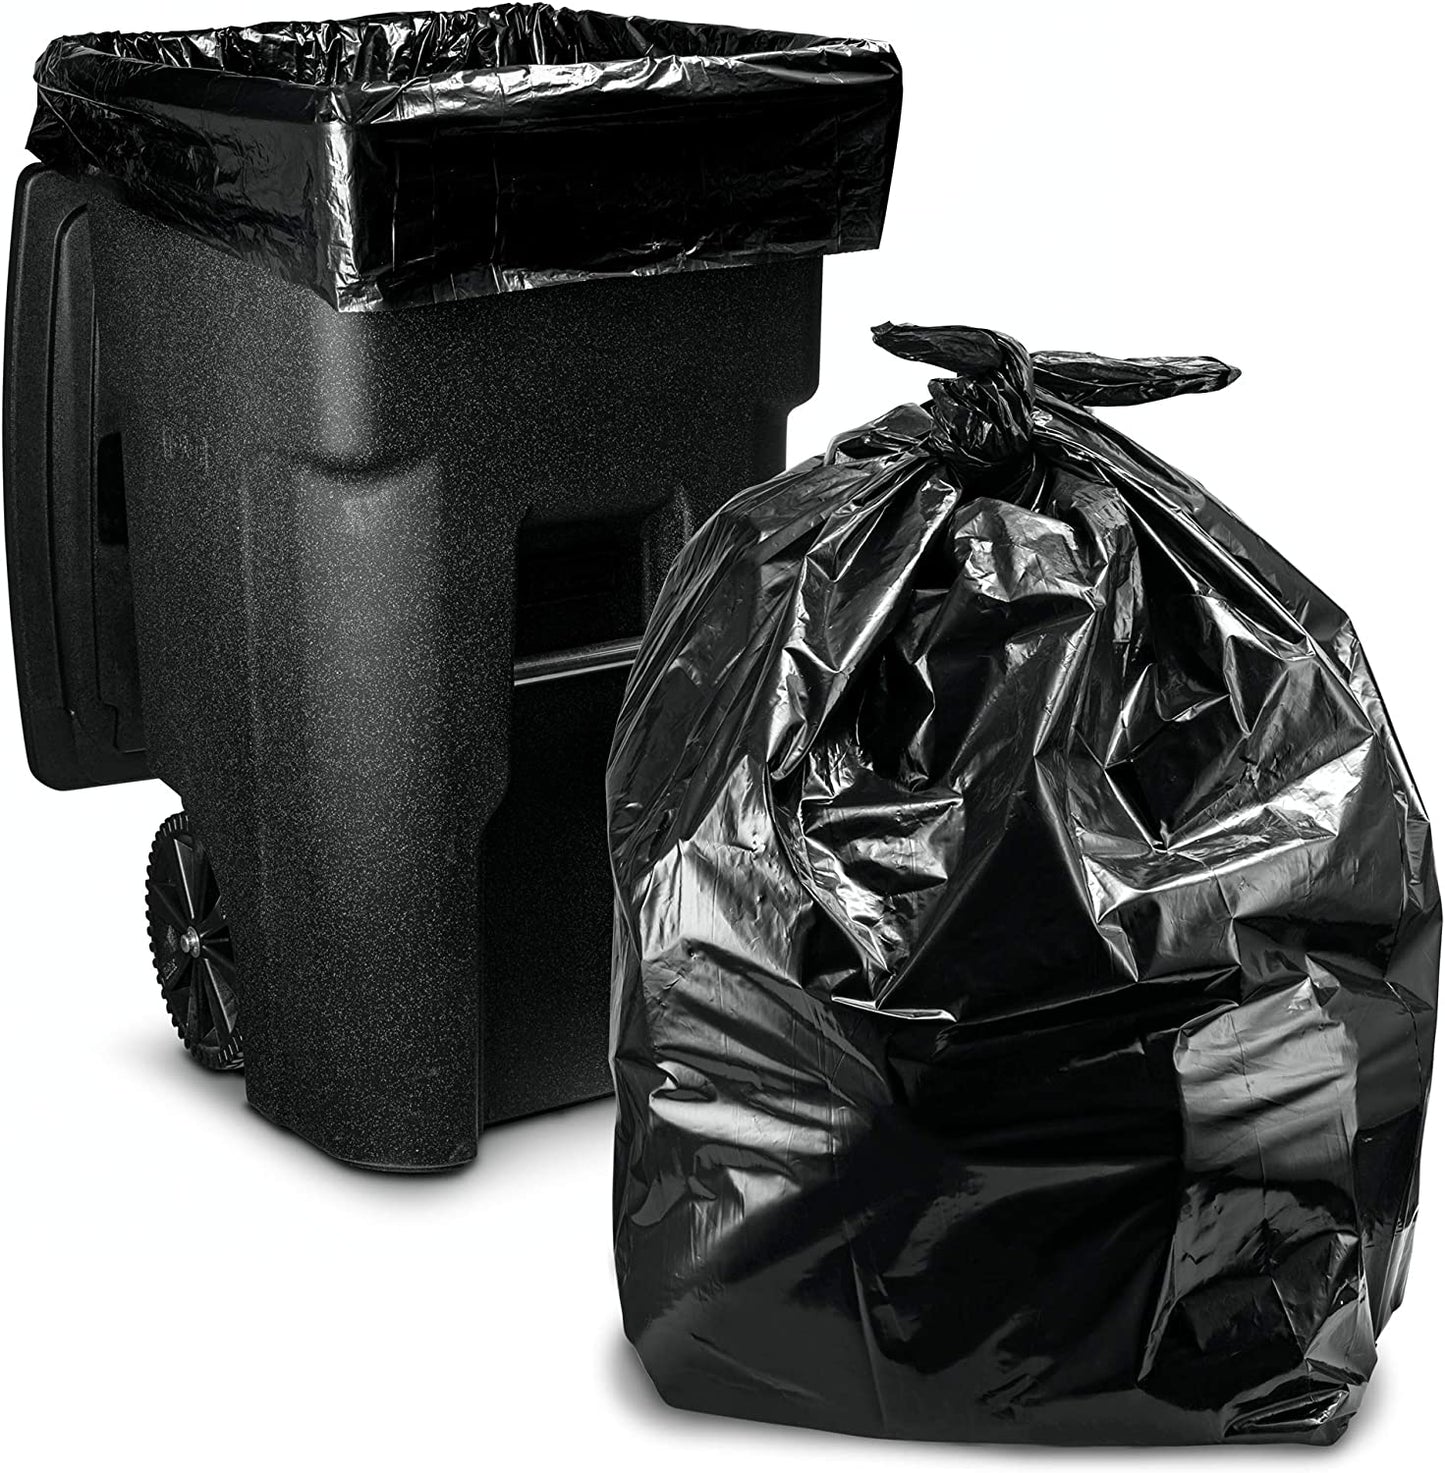 240L Thinkpac Bin Liners Rubbish Bags 23micron (Able) 100 Bags